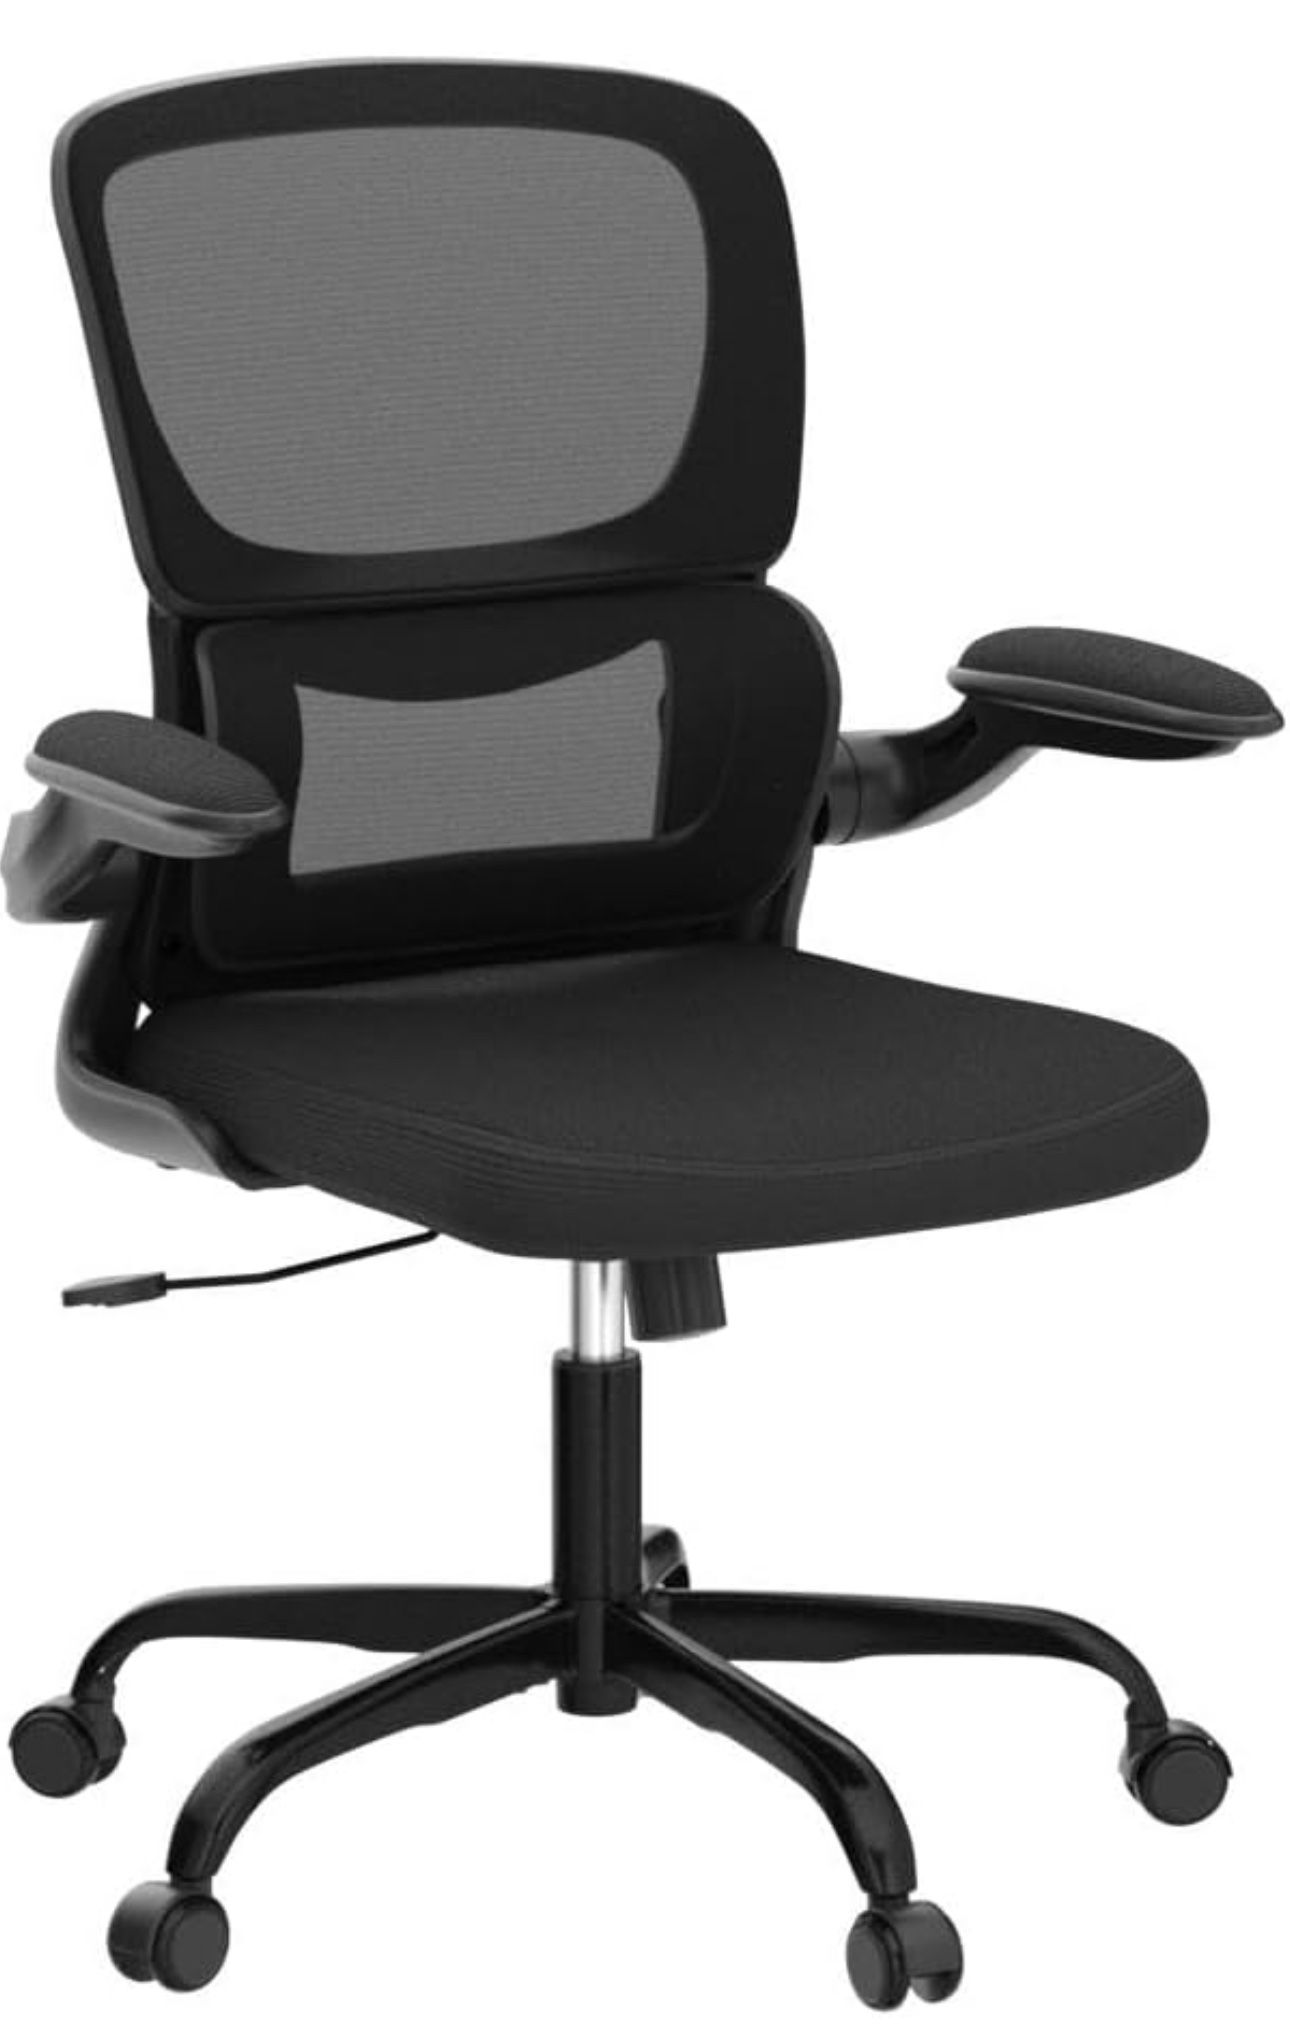 New Razzor Office Chair, Ergonomic Desk Chair with Lumbar Support and Adjustable Armrests, Breathable Mesh Mid Back Computer Chair, Reclining Task Cha